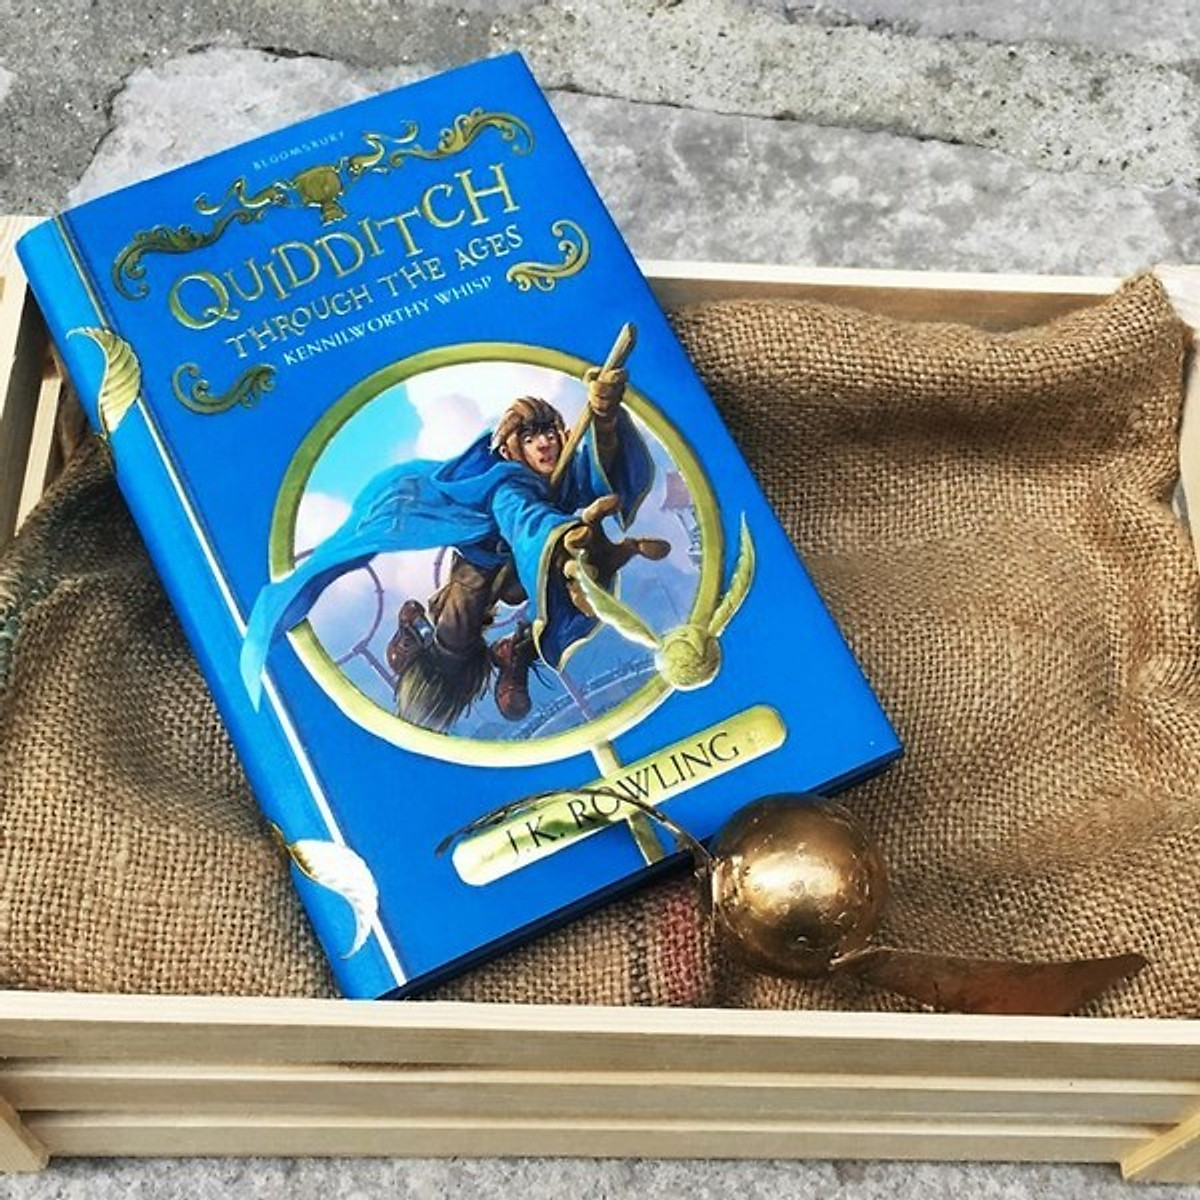 Harry Potter: Quidditch Through The Ages (Hardback) Harry Potter: Quidditch qua các thời đại (English Book)